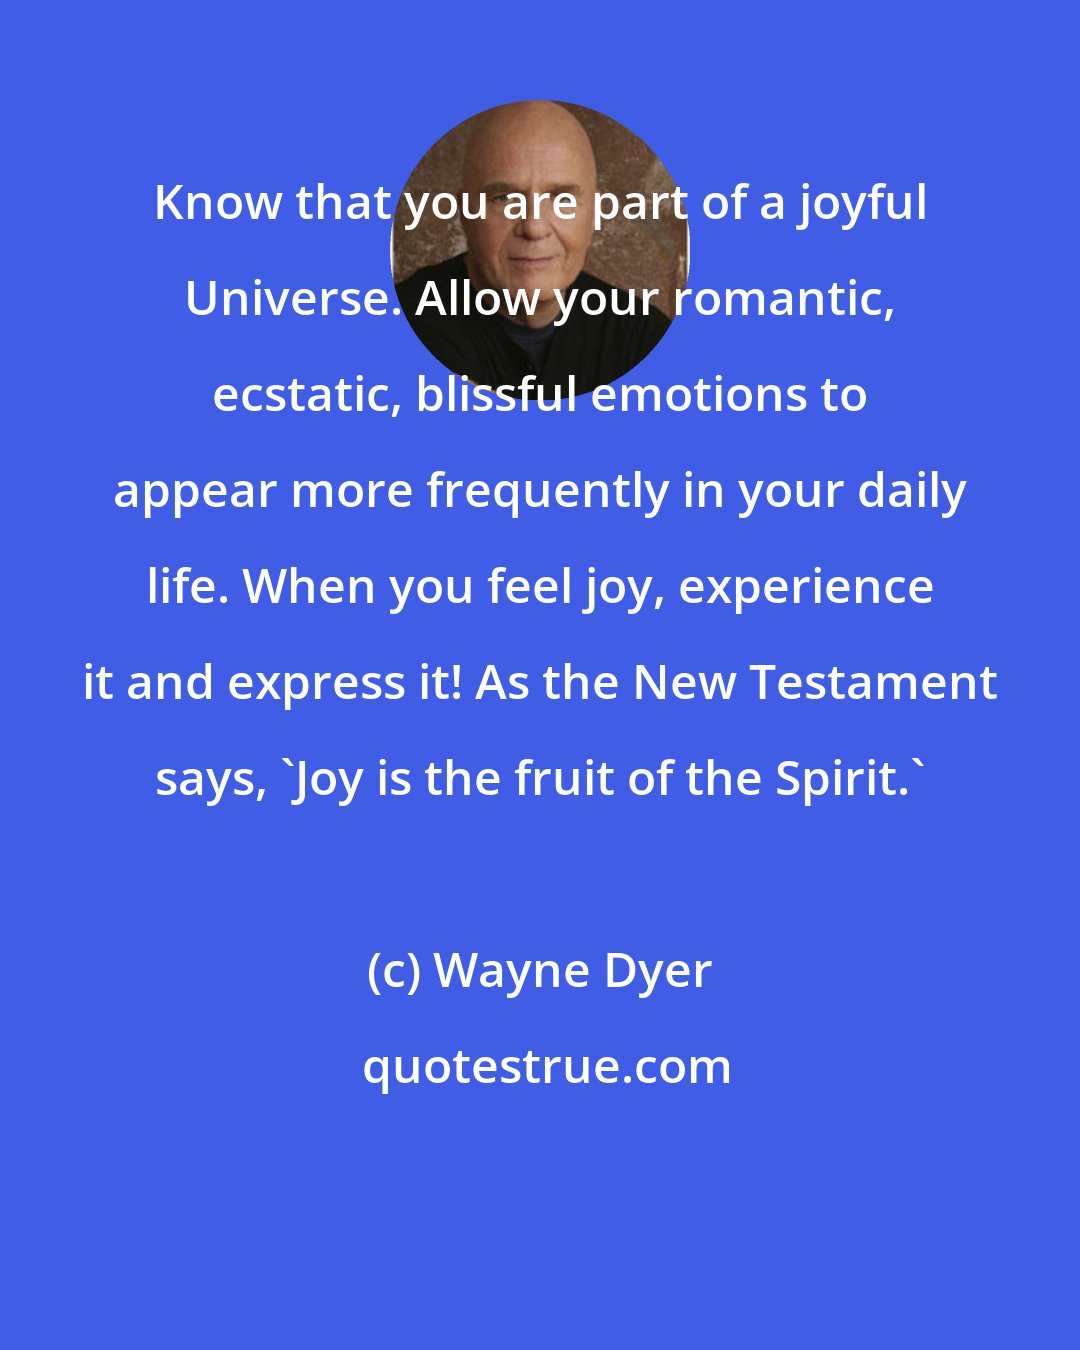 Wayne Dyer: Know that you are part of a joyful Universe. Allow your romantic, ecstatic, blissful emotions to appear more frequently in your daily life. When you feel joy, experience it and express it! As the New Testament says, 'Joy is the fruit of the Spirit.'